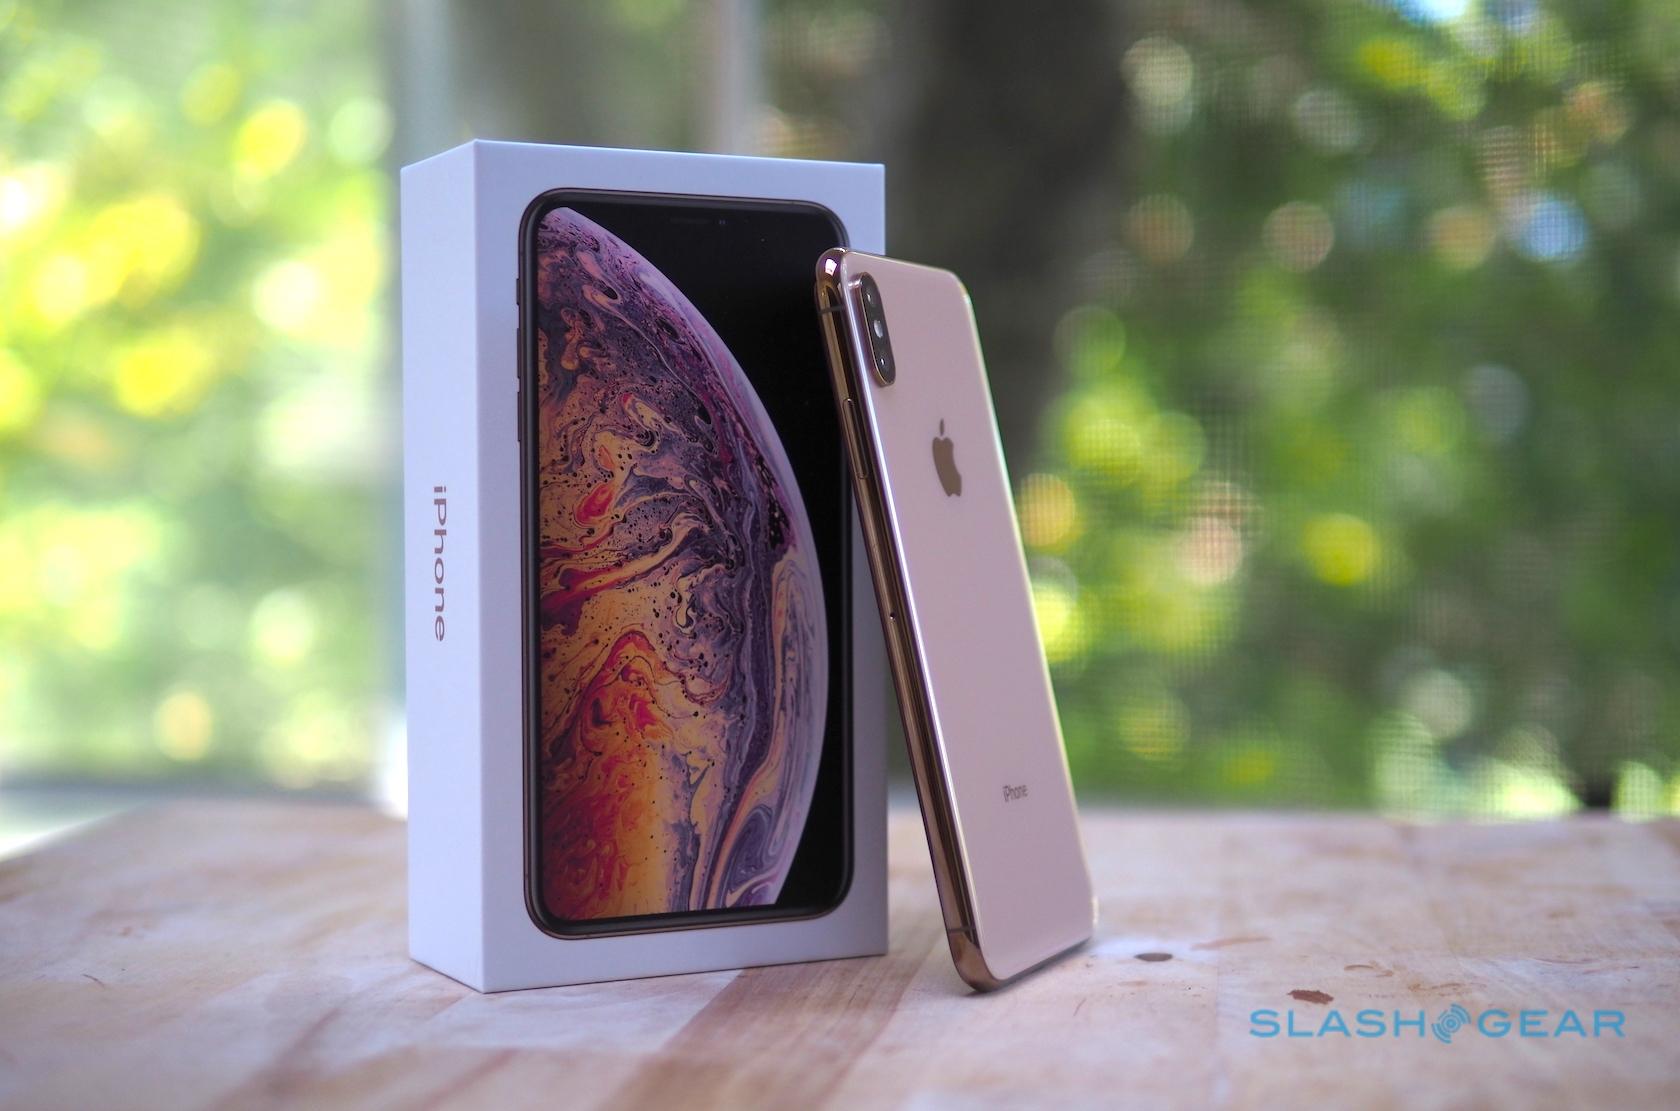 2019 Iphone Xi Changes Less Slippery Coating New Front Tweaks